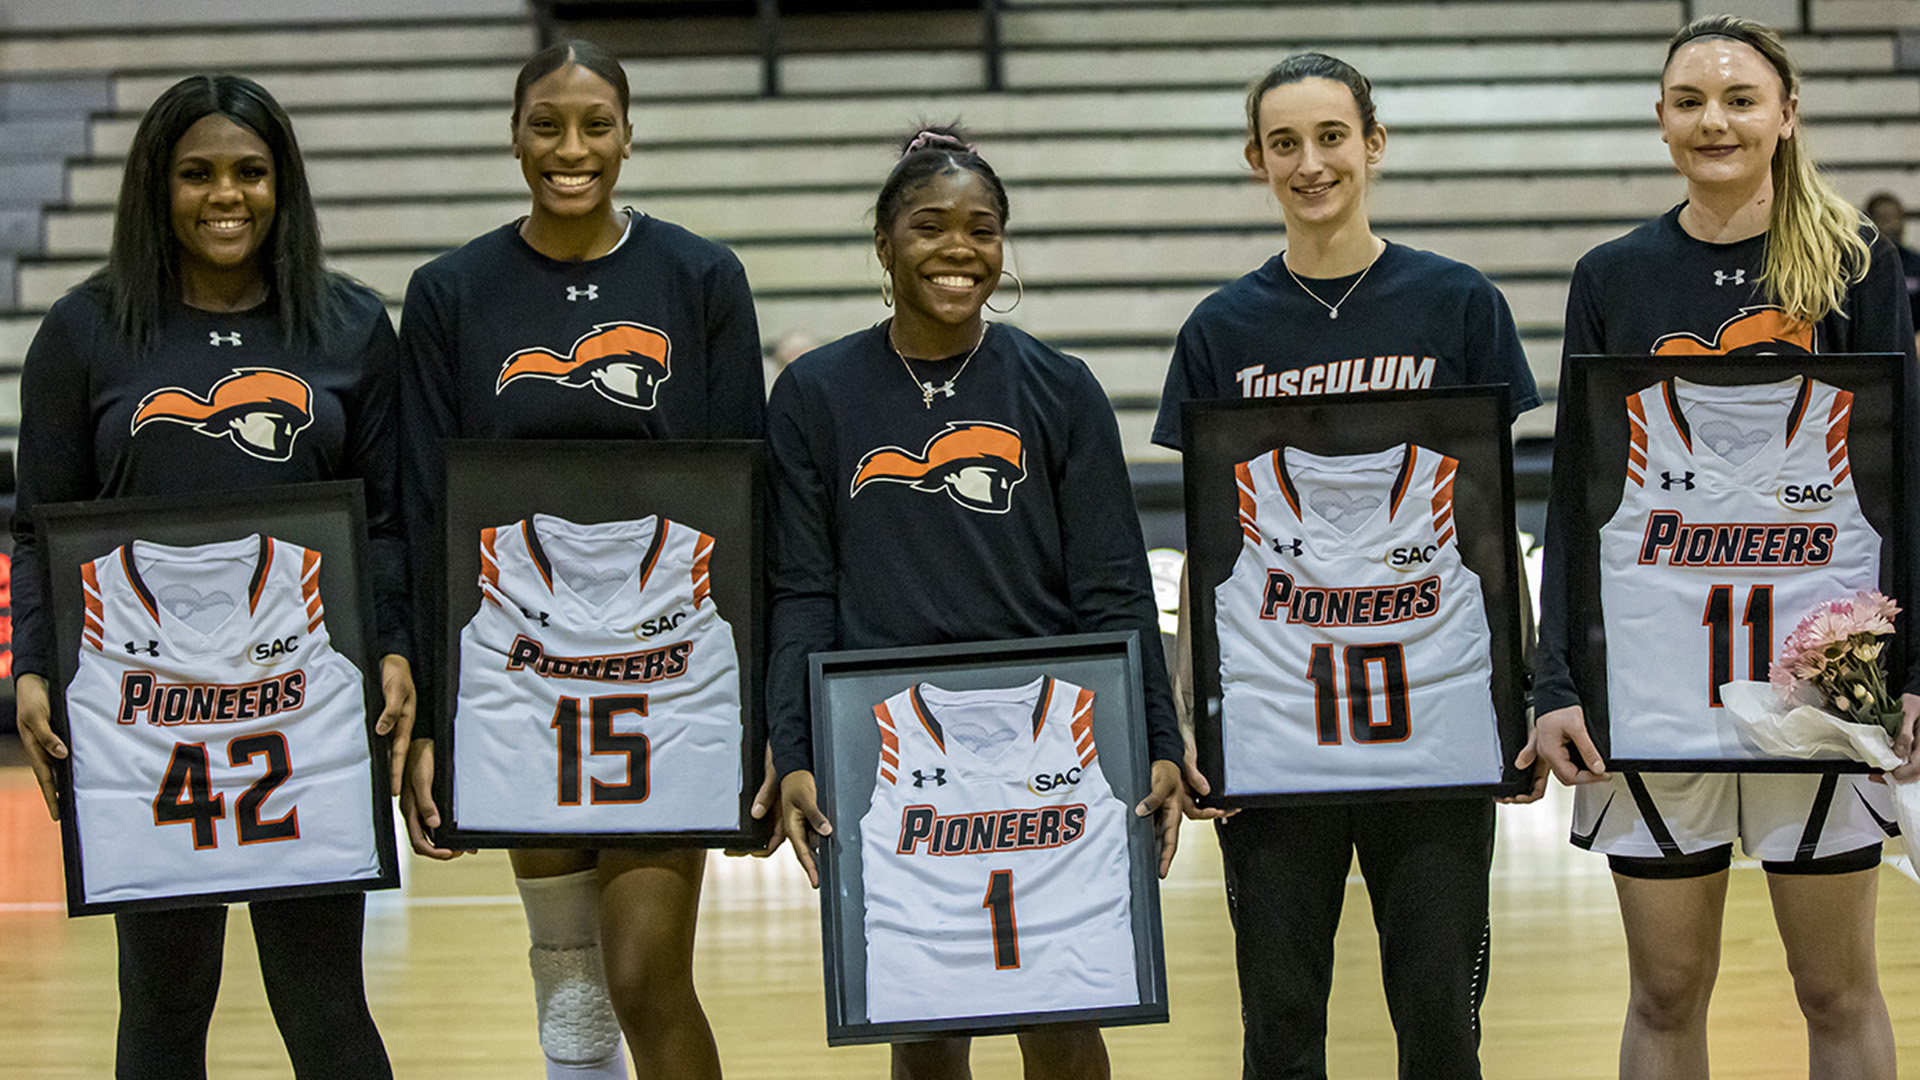 Seniors (from left) Torry Patton, Jasmine Williams, Mia Long, Sydney Wilson and Kasey Johnson were honored prior to Saturday's game (photo by Chuck Williams)